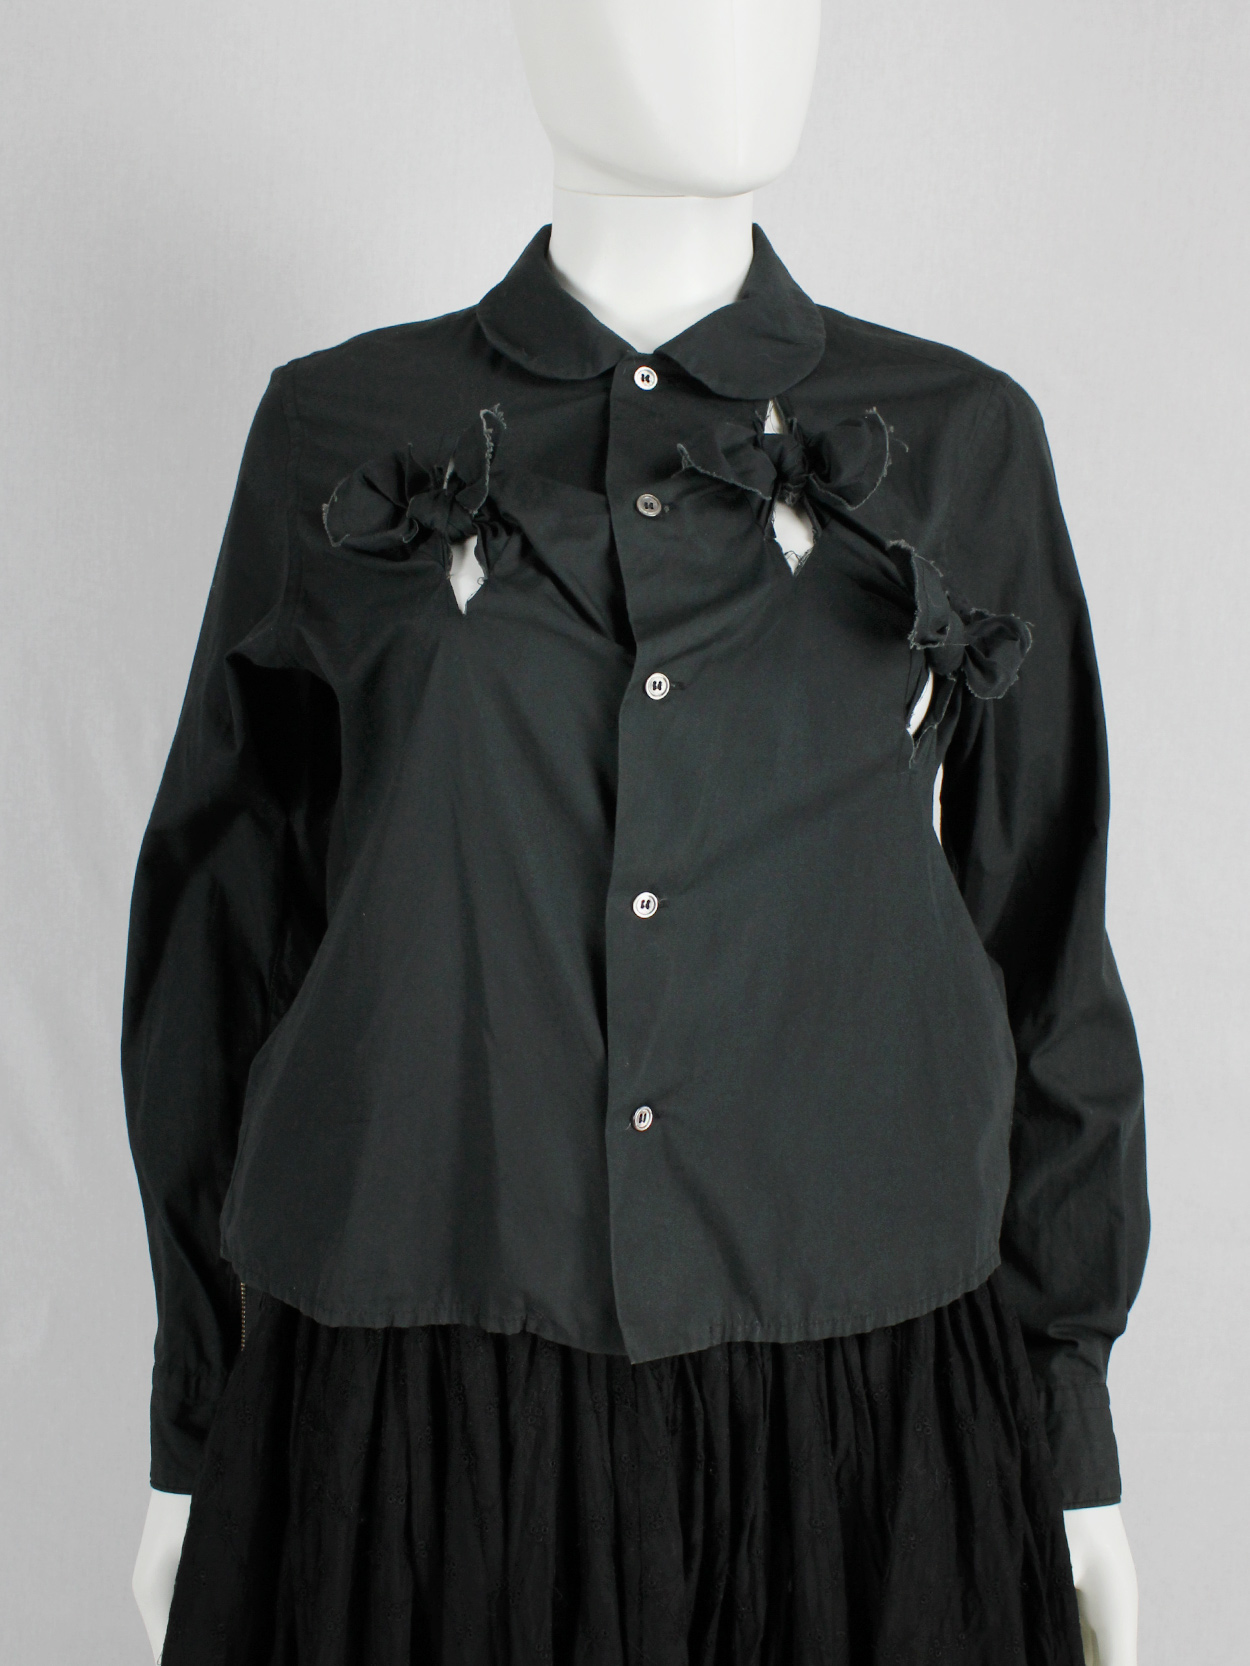 vaniitas Comme des Garcons black shirt with slits and three bows spring 2002 (1)